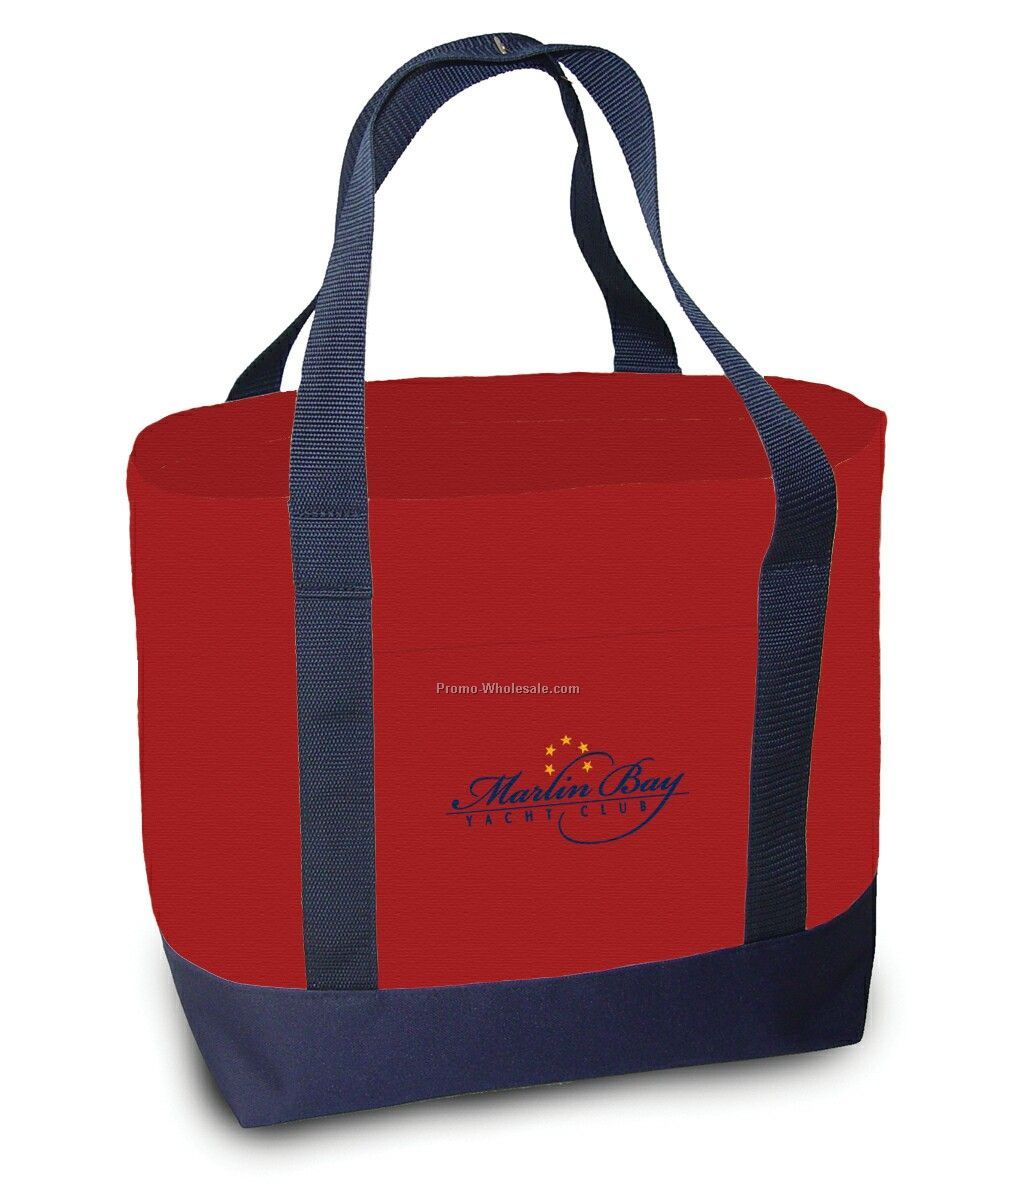 726 (A) D Medium Two-tone Tote With Poly Handles